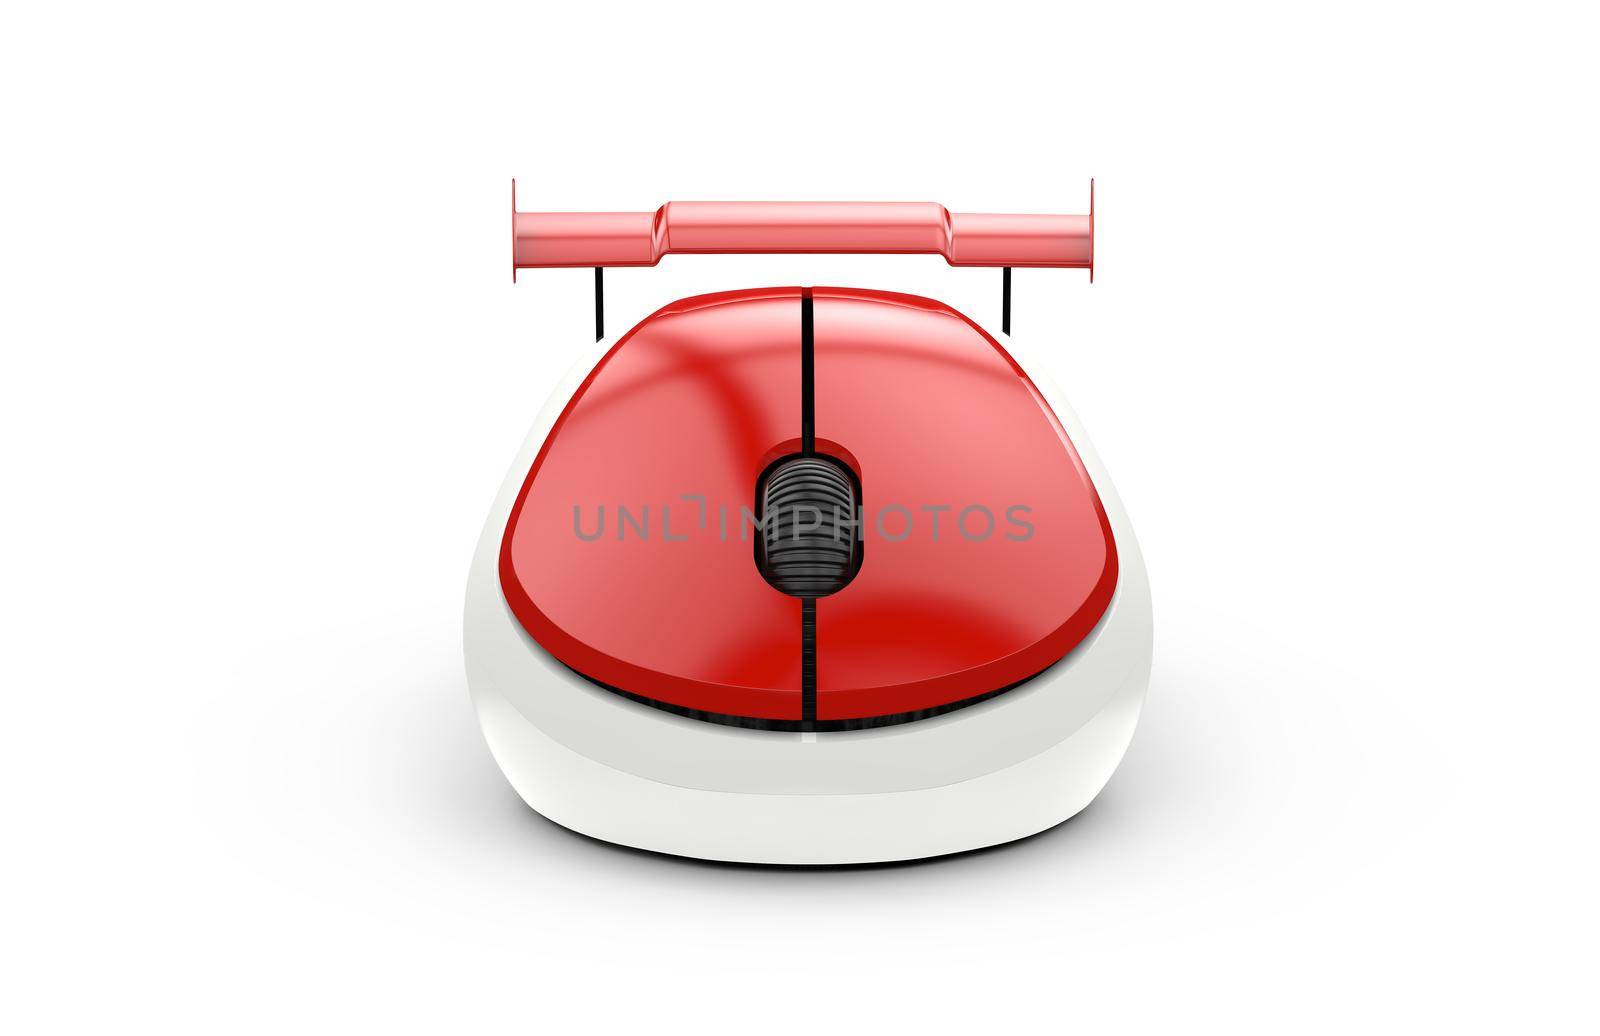 High speed computer mouse isolated on a white background